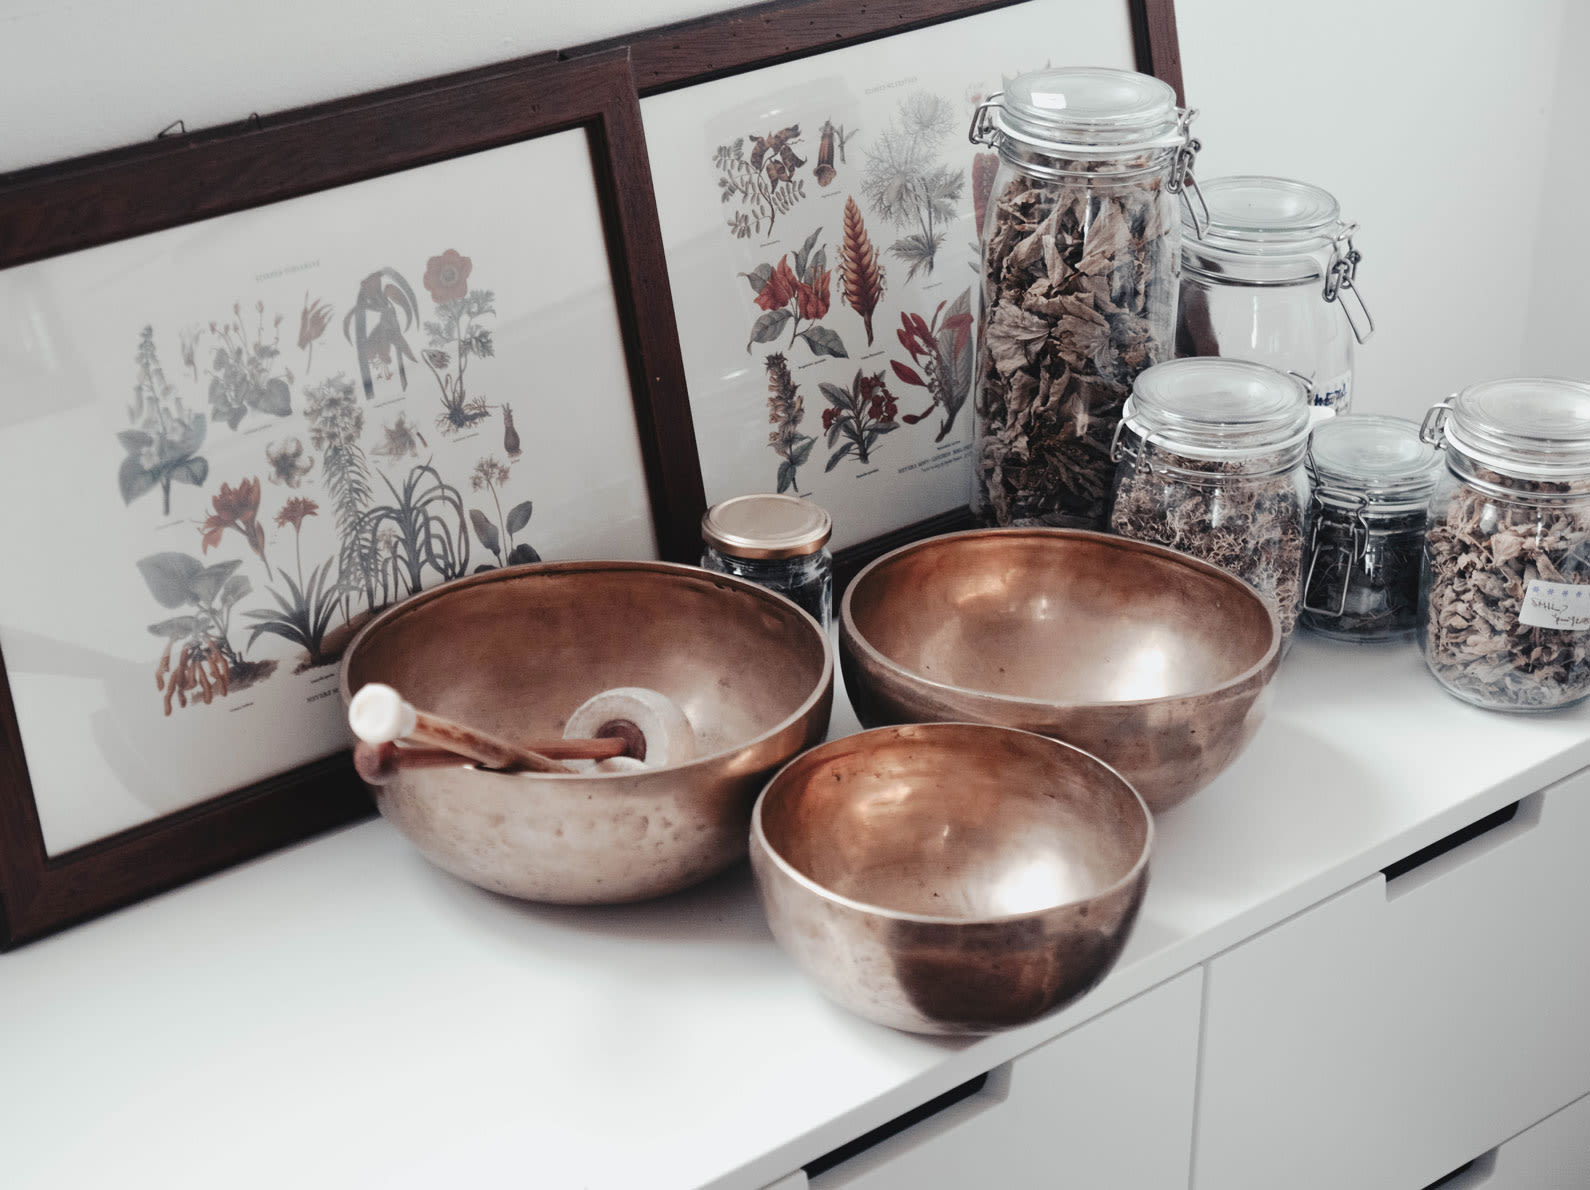 Copper bowls on shelf with herbs in glass jars and picture frames with botanical pictures.